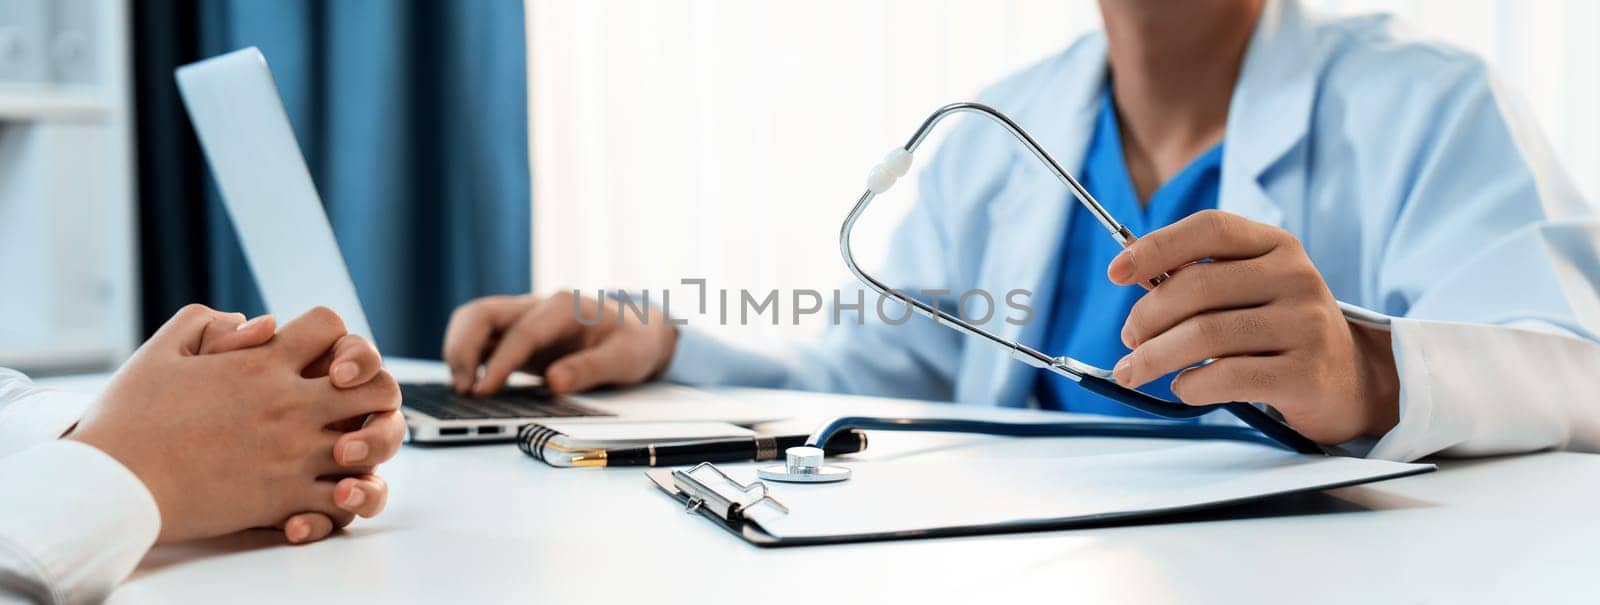 Patient attend doctor's appointment at clinic or hospital office, discussing medical treatment options and explaining examination results or medical record about sickness. Panorama Rigid